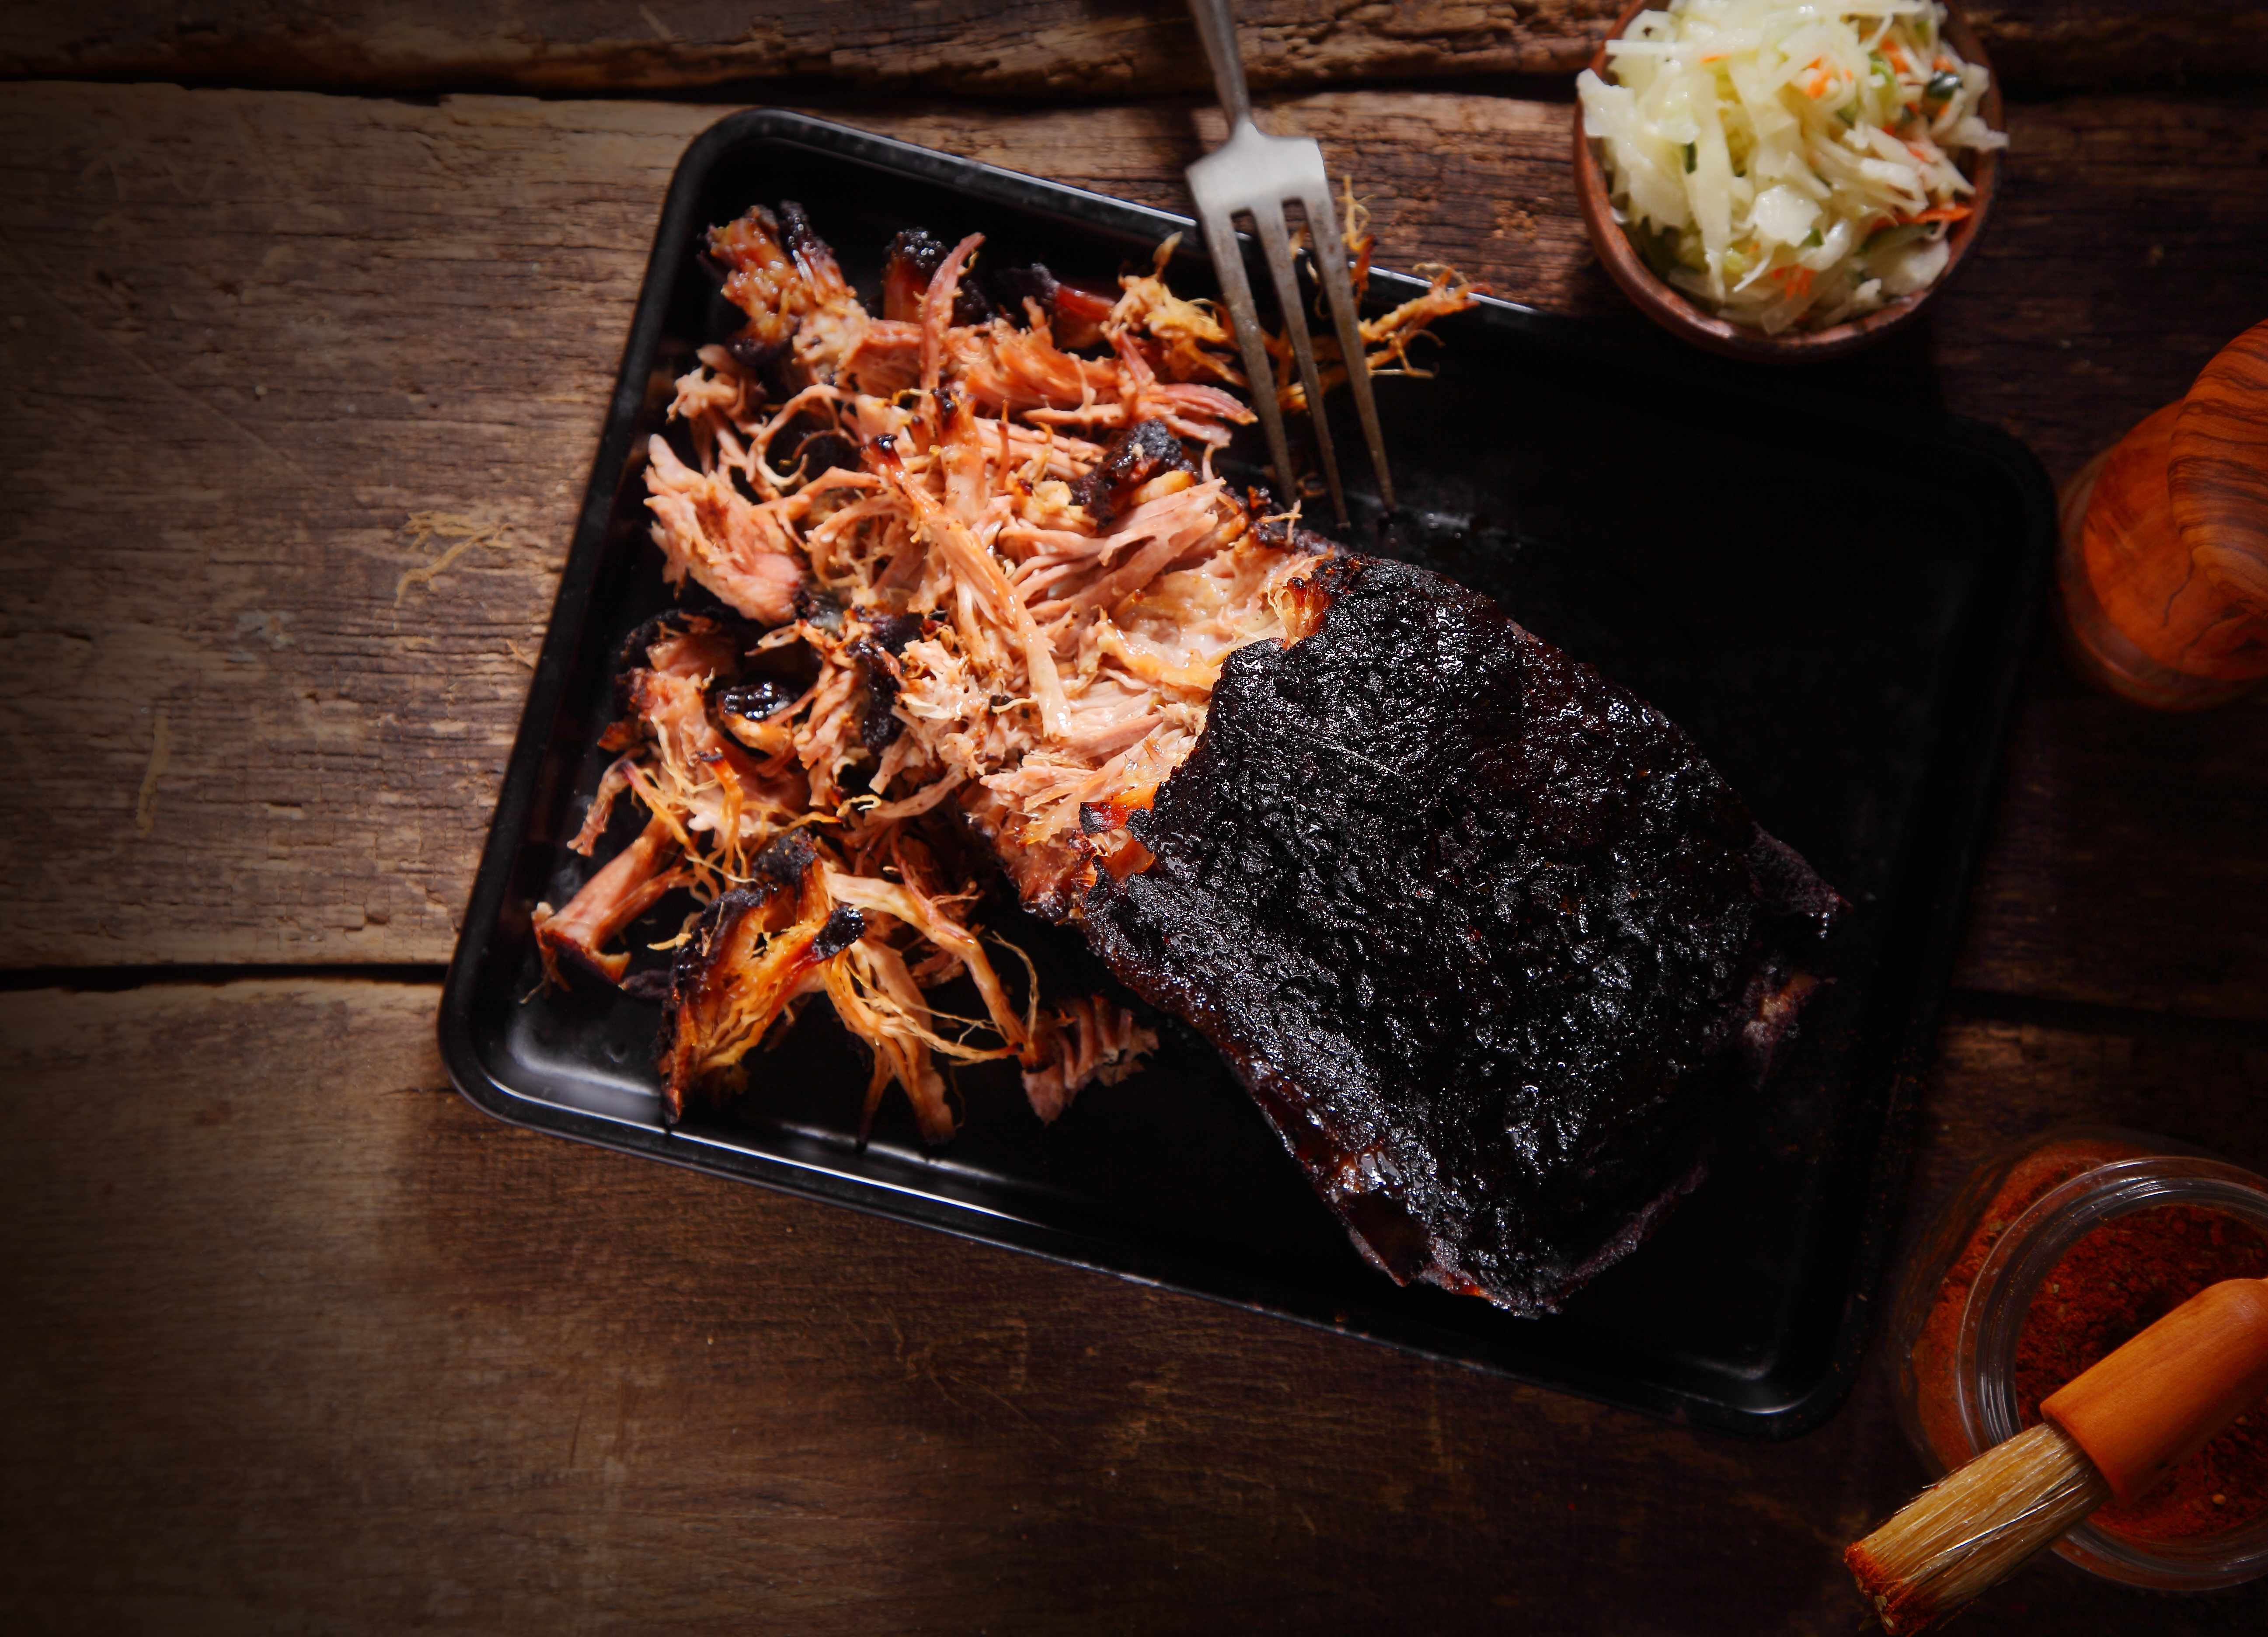 Juicy pulled pork on tray on wooden table pit boss grills hardwood pellets and smokers